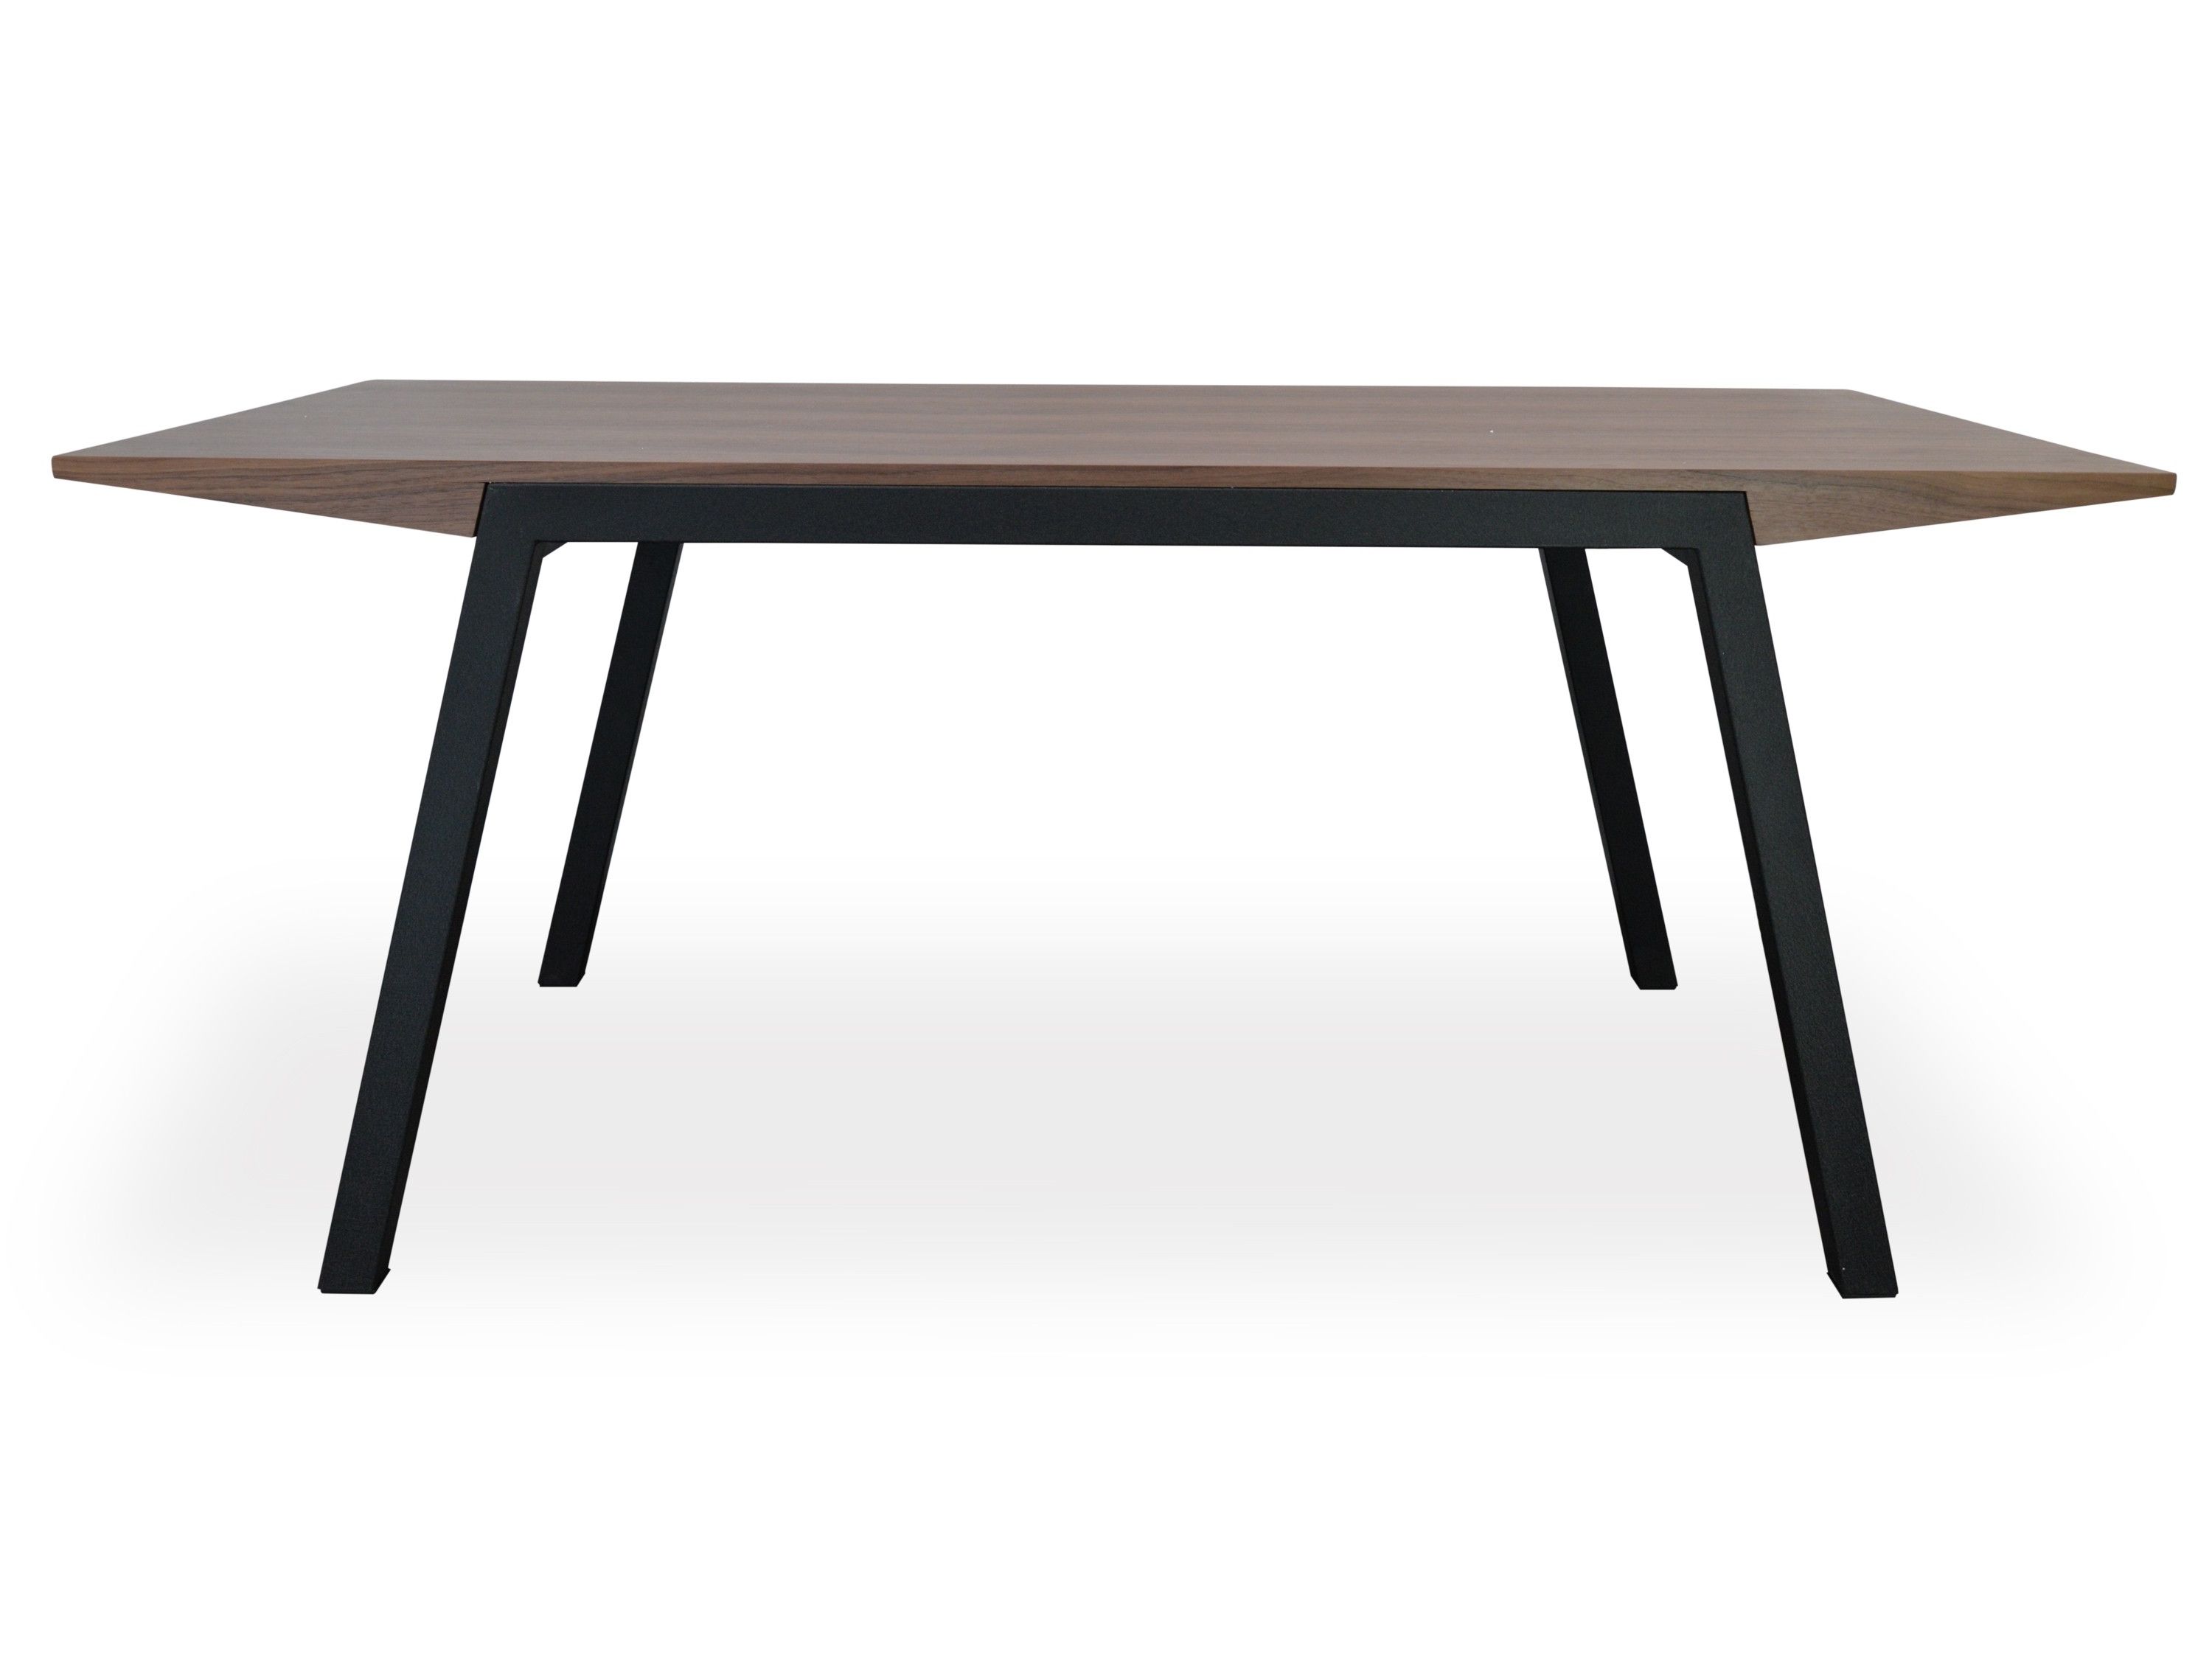 Jaxon Grey Round Extension Dining Tables Inside Fashionable Dinex Alfa Extension Dining Table New Jaxon Extension Rectangle (View 5 of 25)